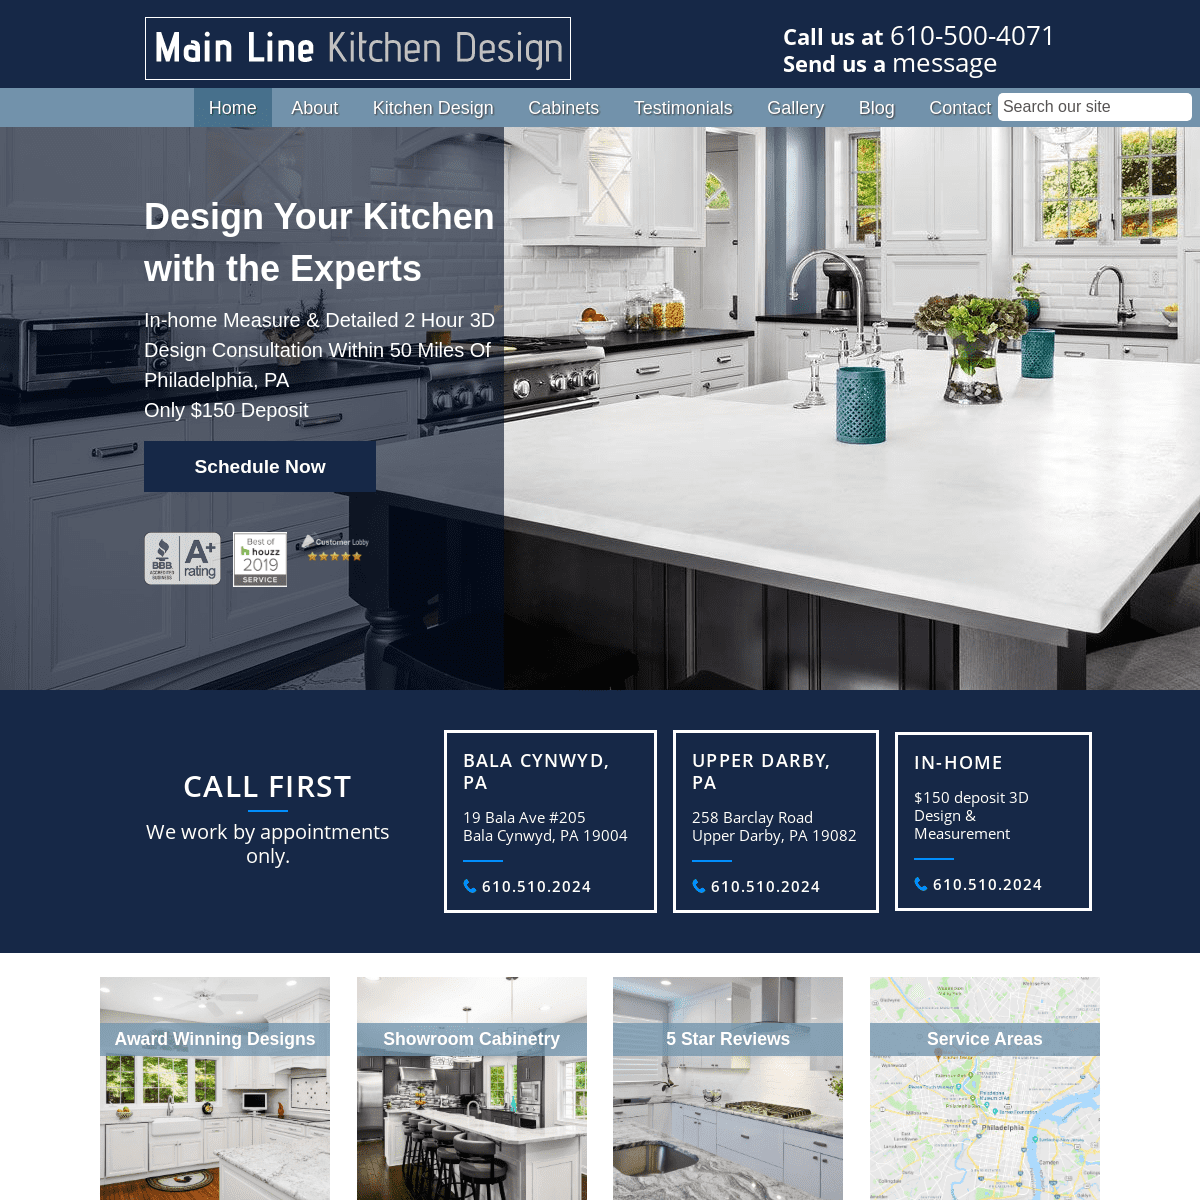 A complete backup of mainlinekitchendesign.com